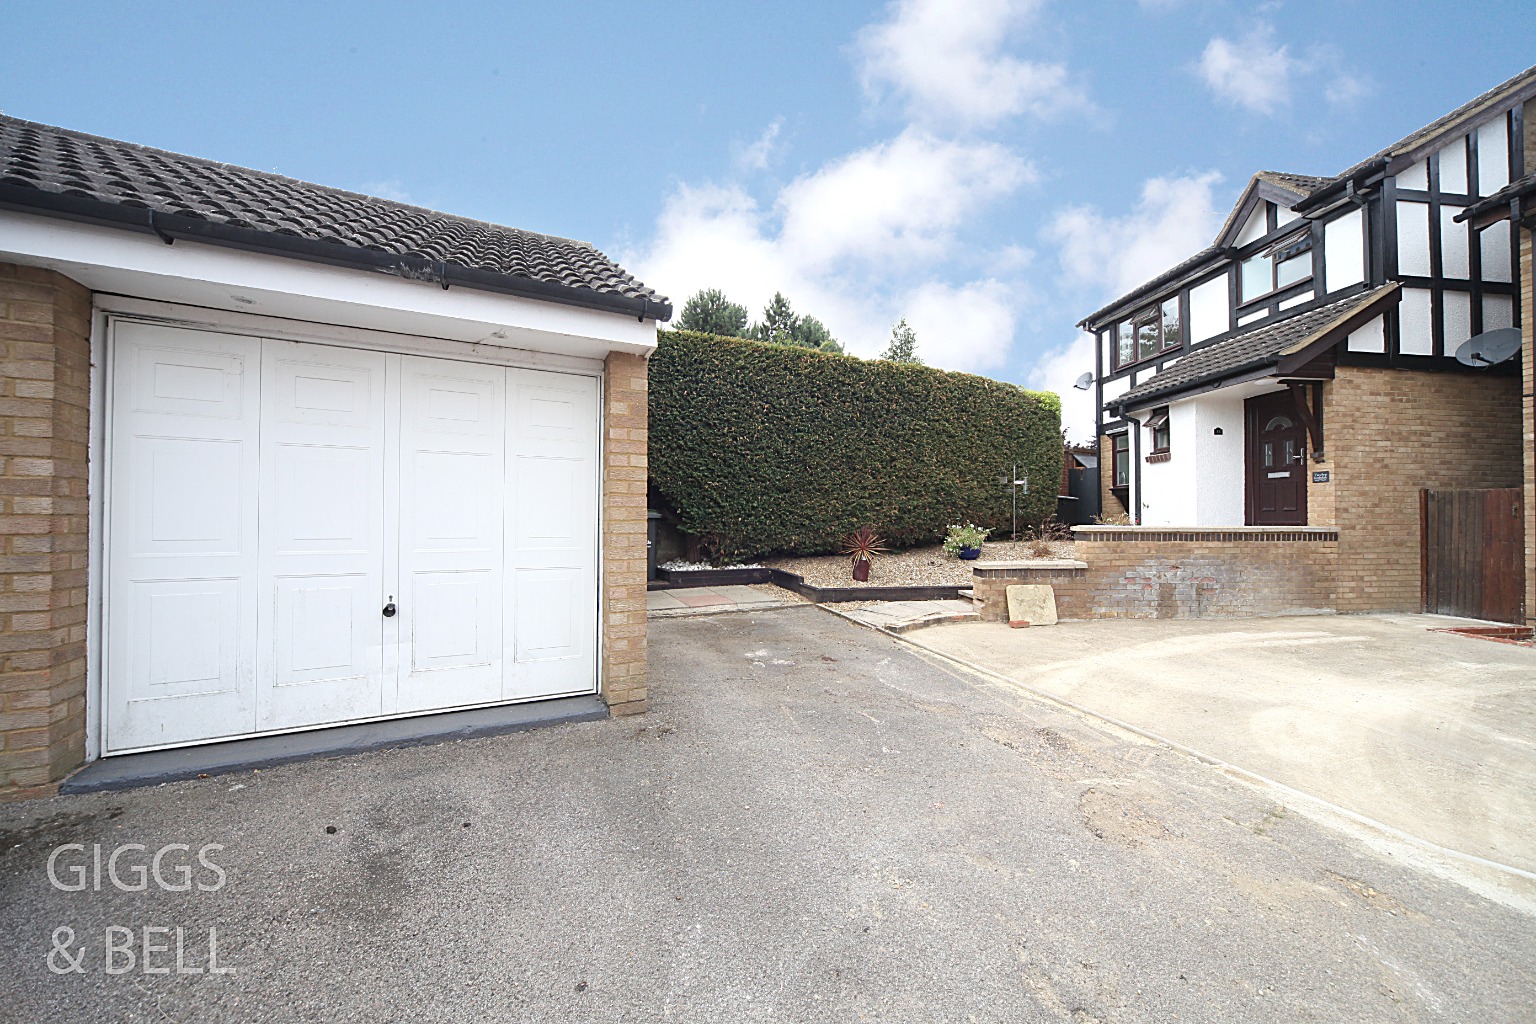 4 bed detached house for sale in Reedsdale, Luton - Property Image 1